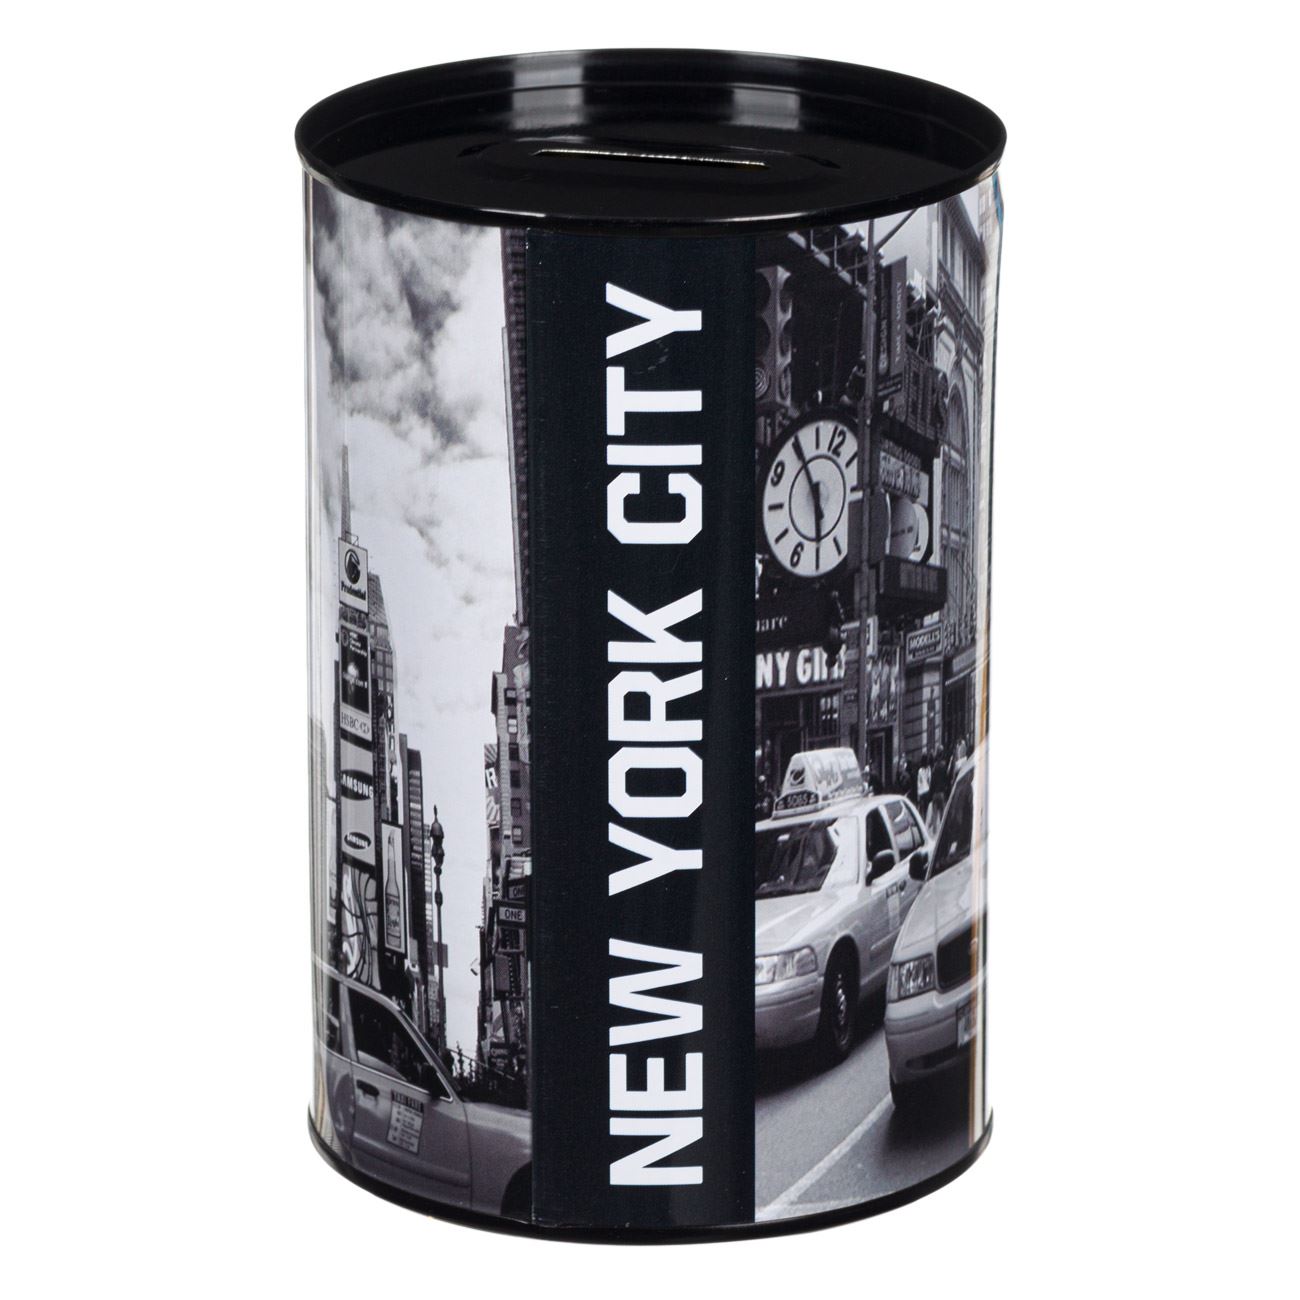 Persely Black New York 10x15 cm